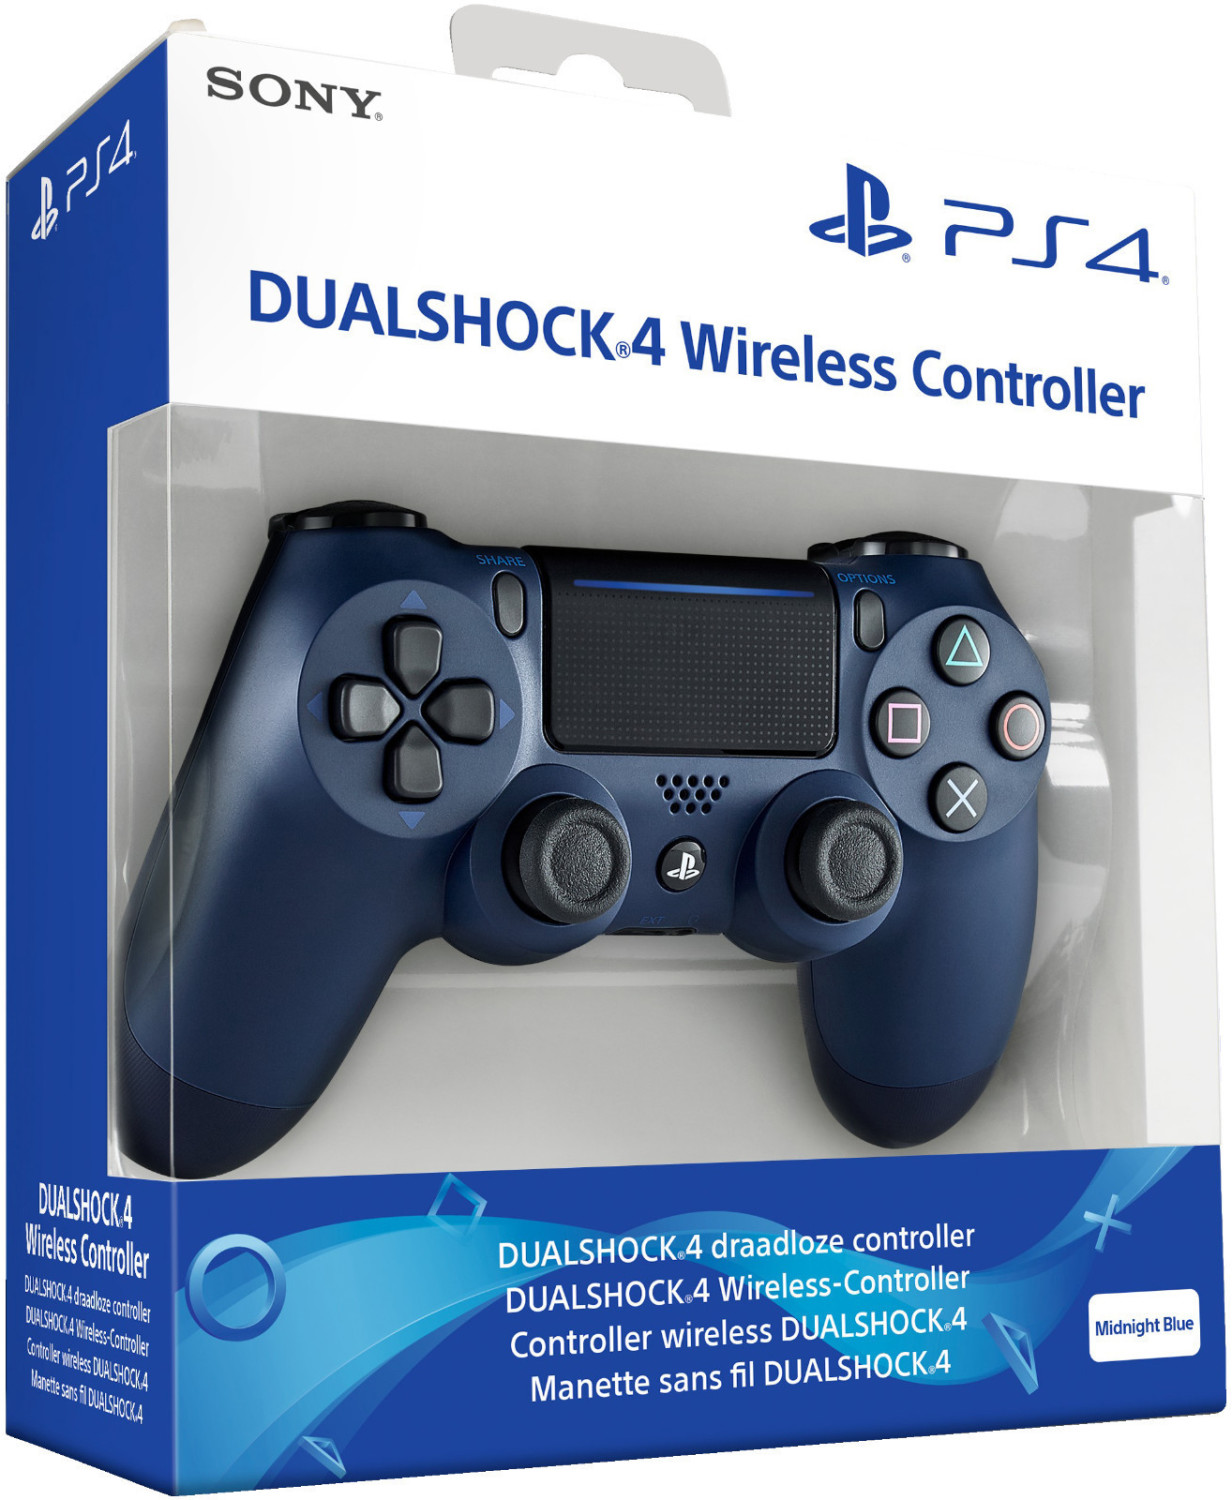 DualShock Controller from (Today) Sony 4 Deals on Blue) £44.99 – Buy (Midnight Best